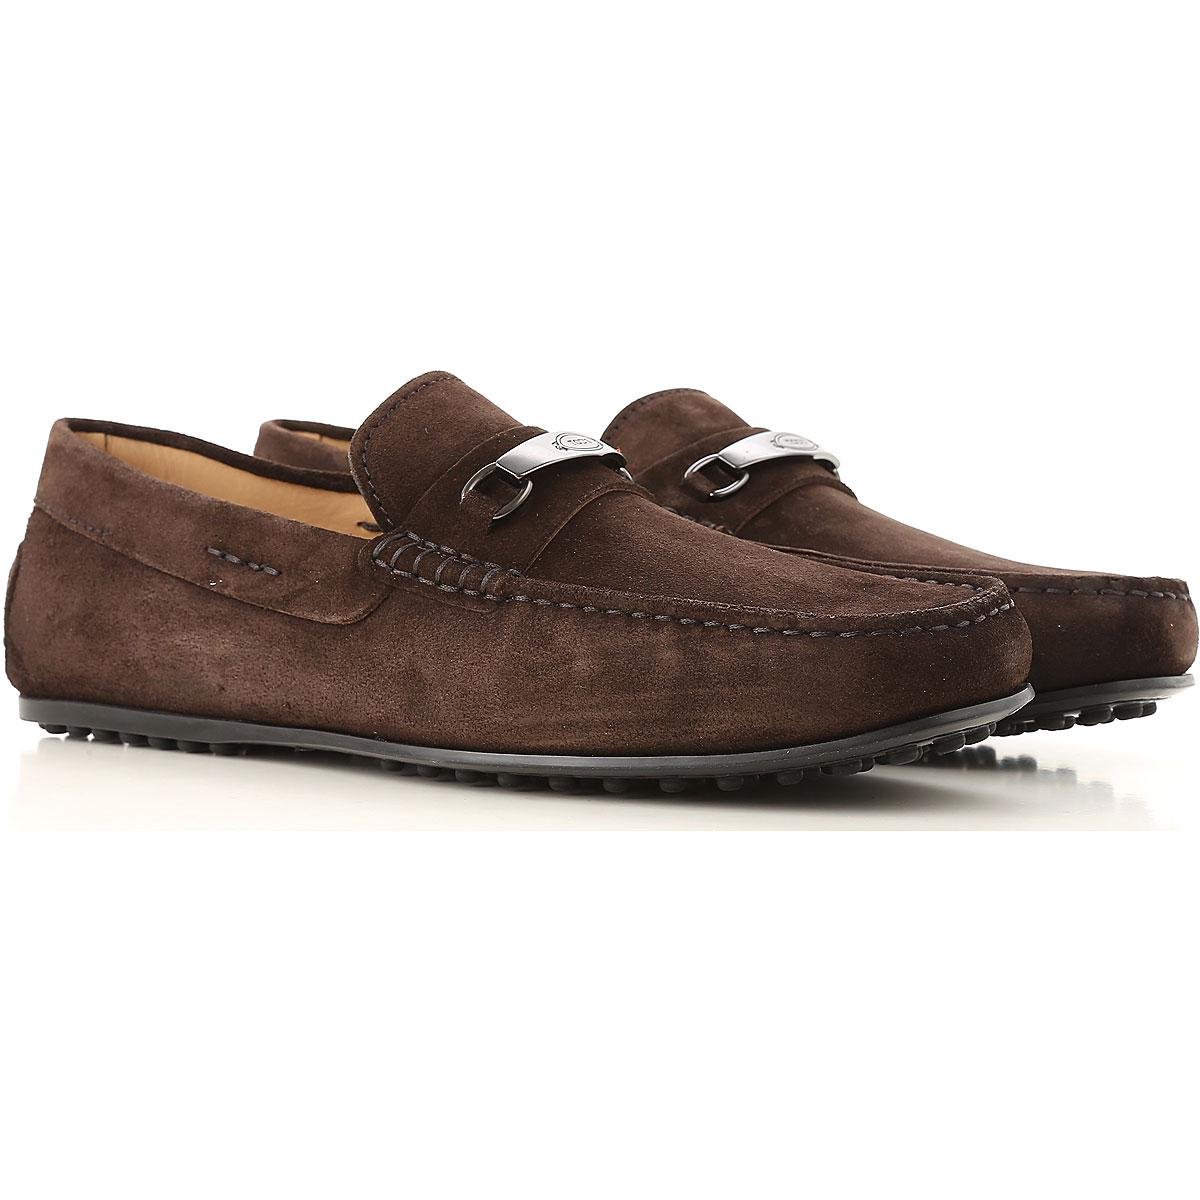 Tod's Leather Loafers For Men On Sale in Dark Brown (Brown) for Men - Lyst